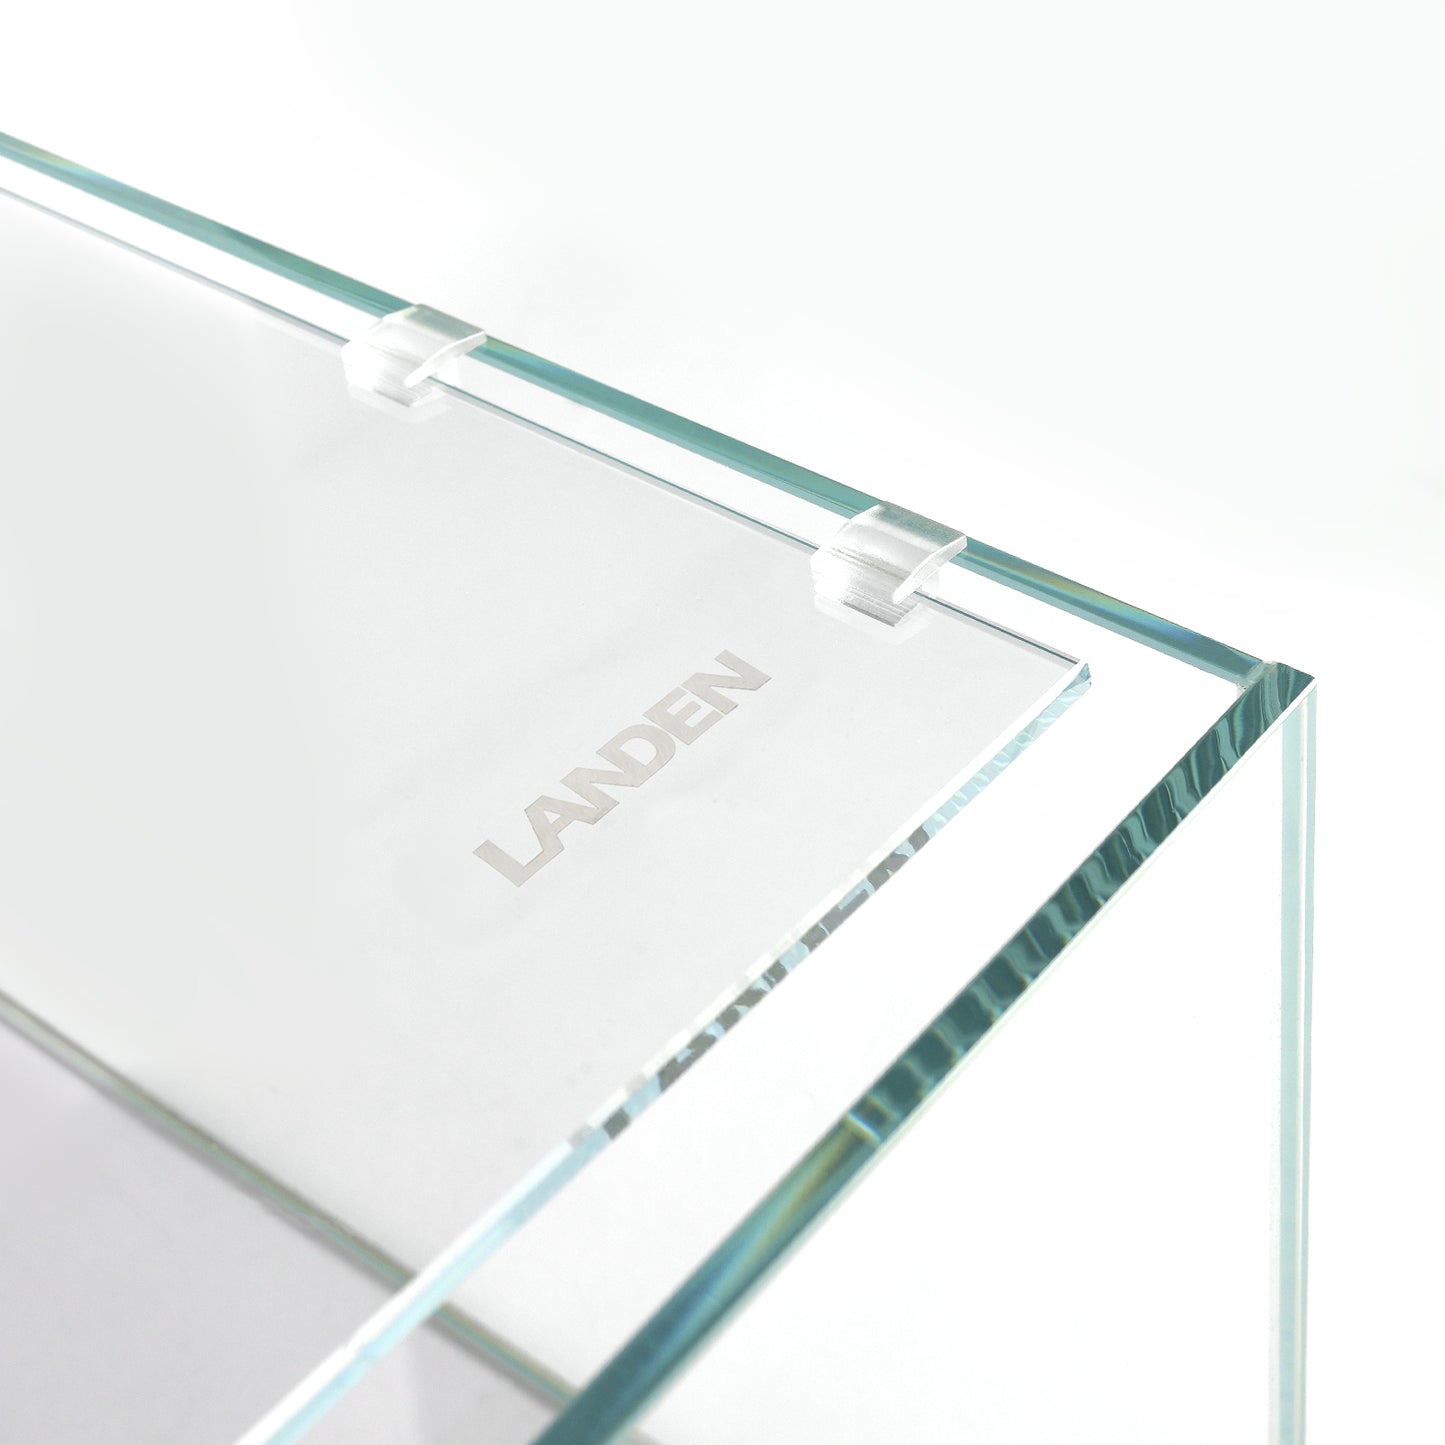 LANDEN 4mm Thick Clear Glass Aquarium Lid, Includes 4 Clips for Secure Placement, 432 X 230mm(17.01x9.06 inches) Adapted to SD453030,ARF45